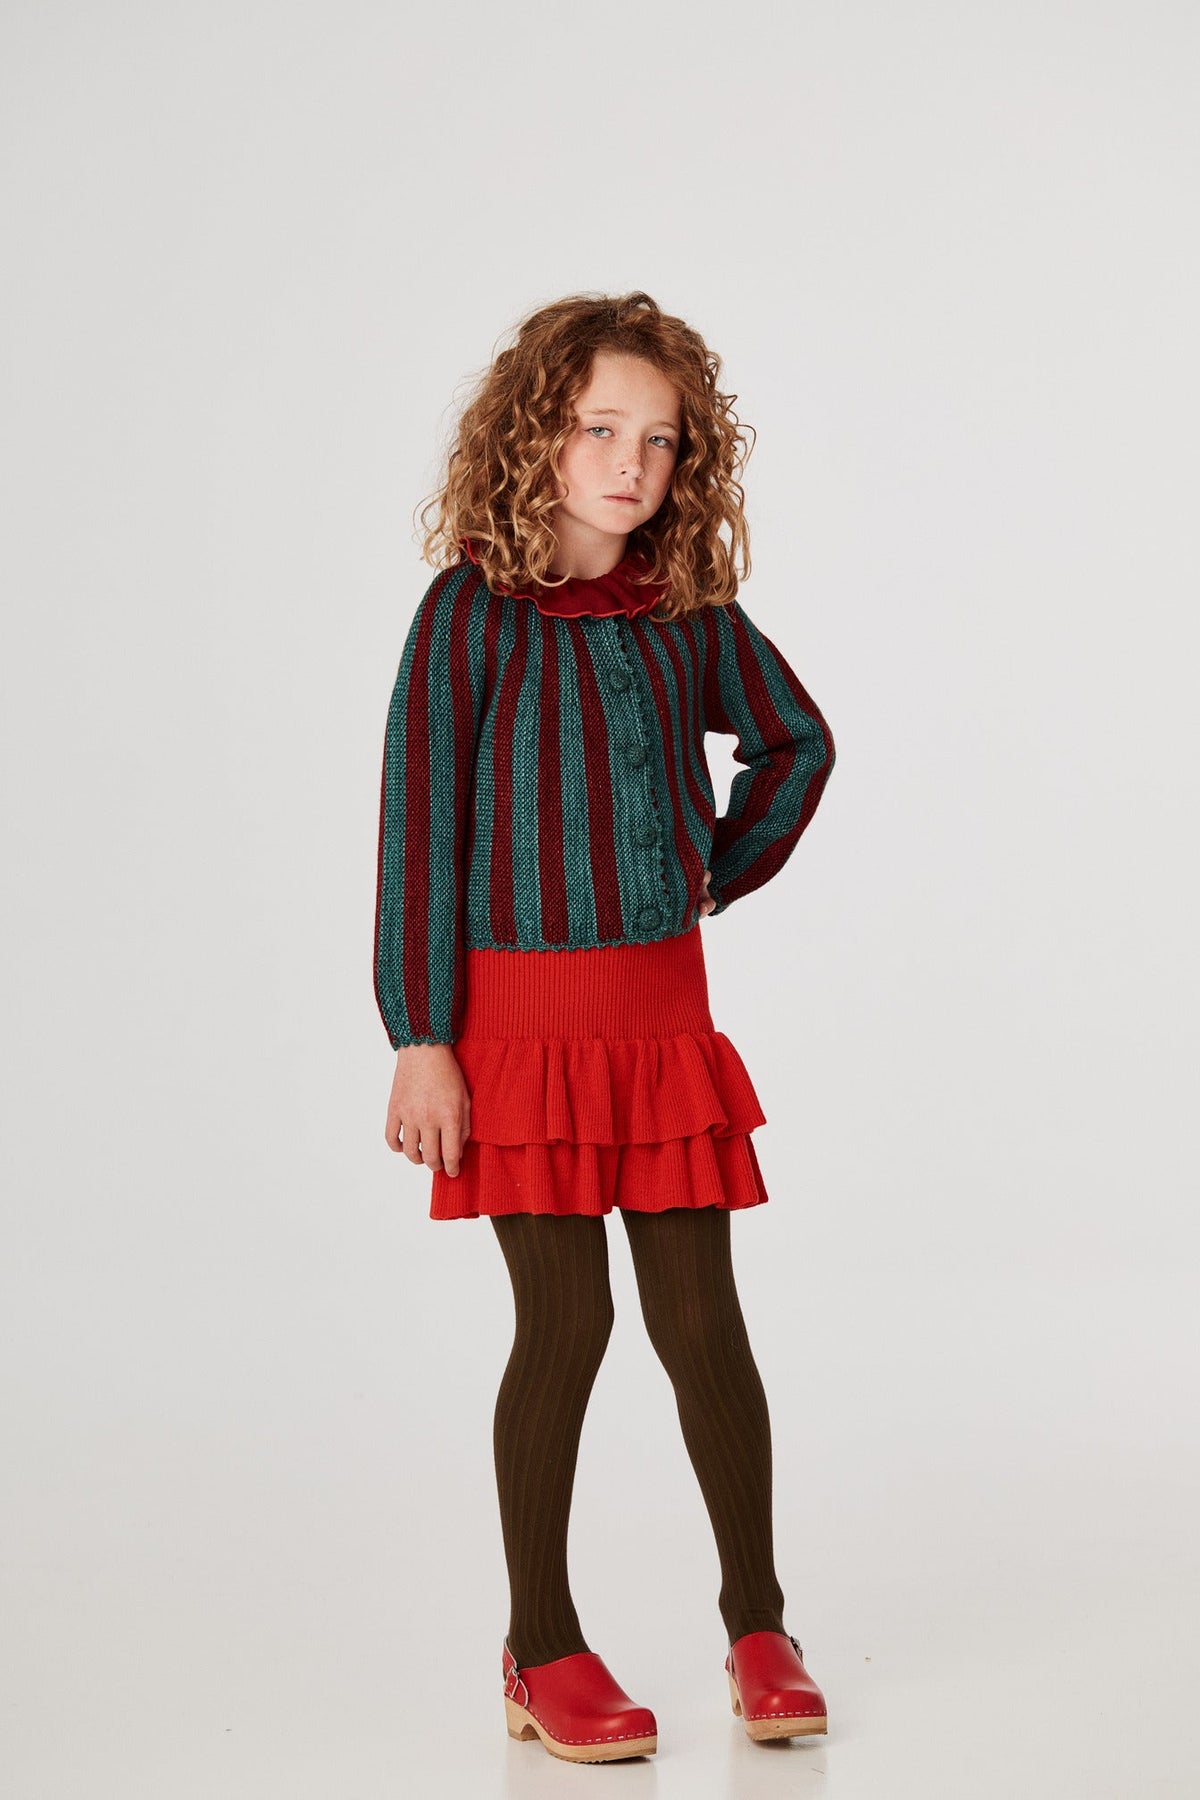 Short Circus Cardigan - Peacock+Model is 53 inches tall, 58lbs, wearing a size 7-8y